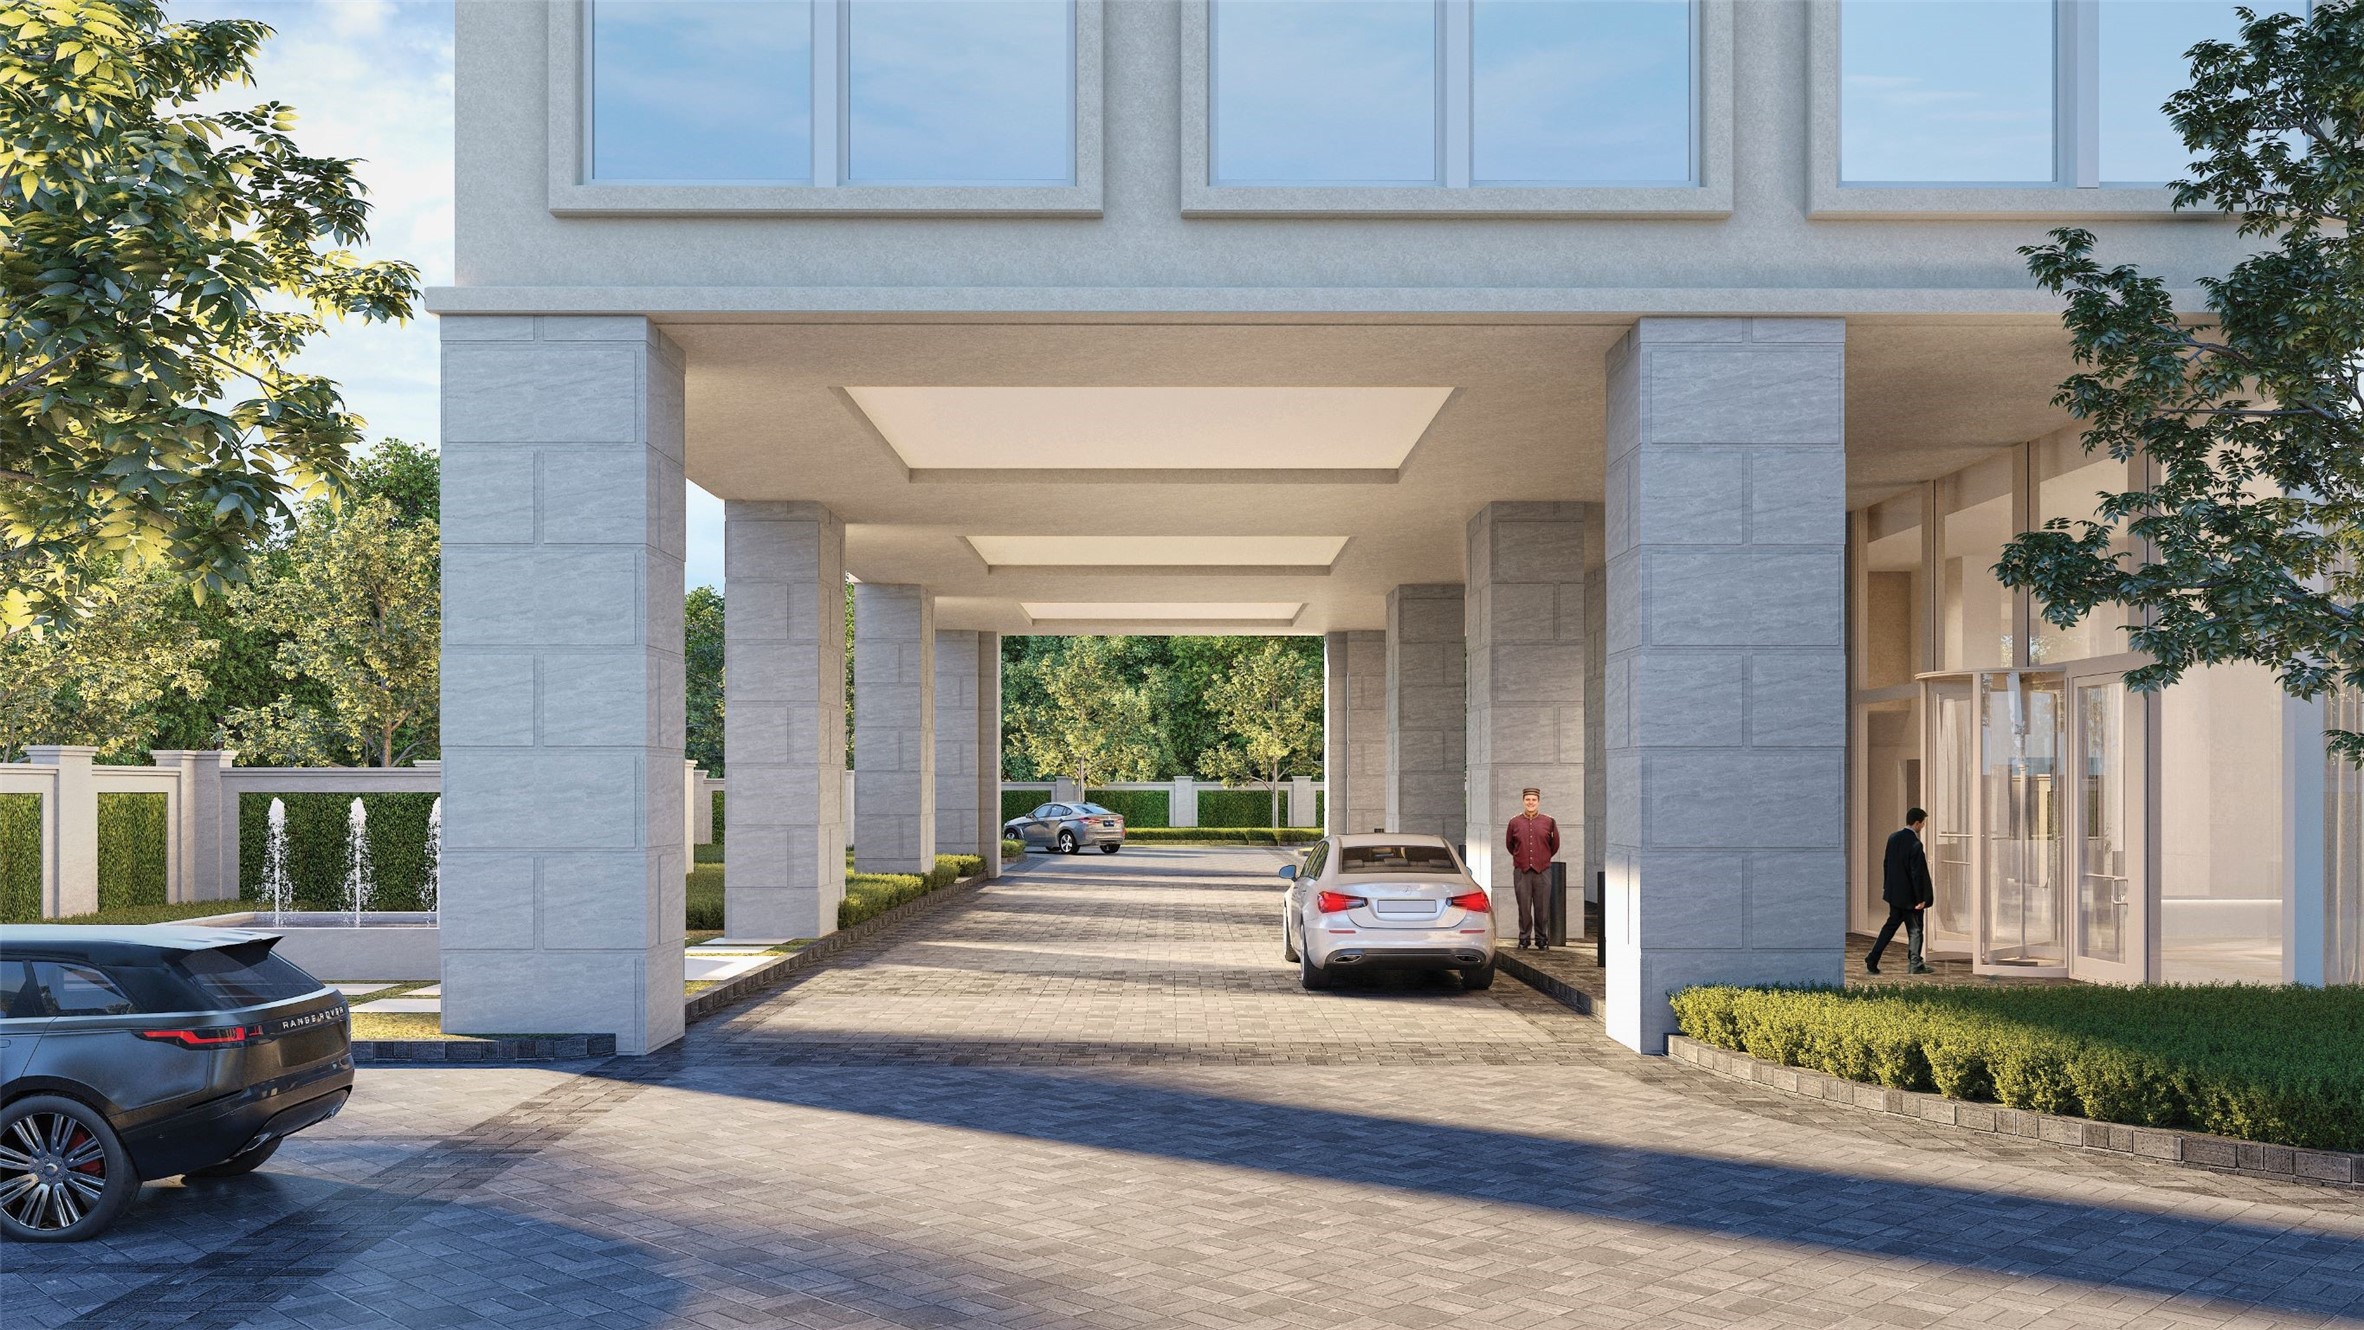 Just passed the 8 ft. ivy-clad privacy wall that completely engulfs the building's perimeter, residents and guests alike find the grand, dual entry/exit porte-cochere where the valet awaits to take it from here.